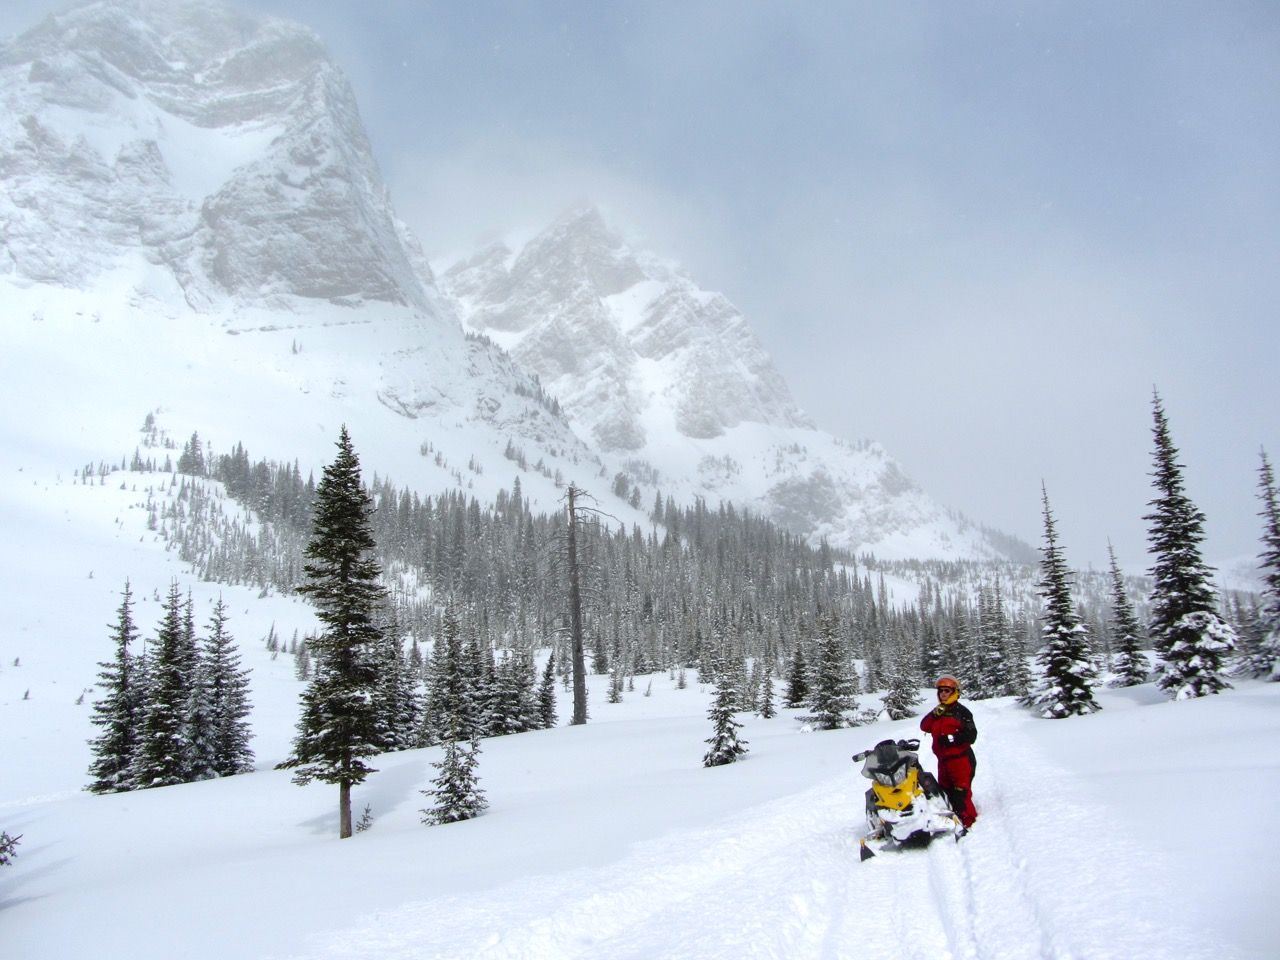 My snowmobile bucket list included mountain riding in the Rockies.